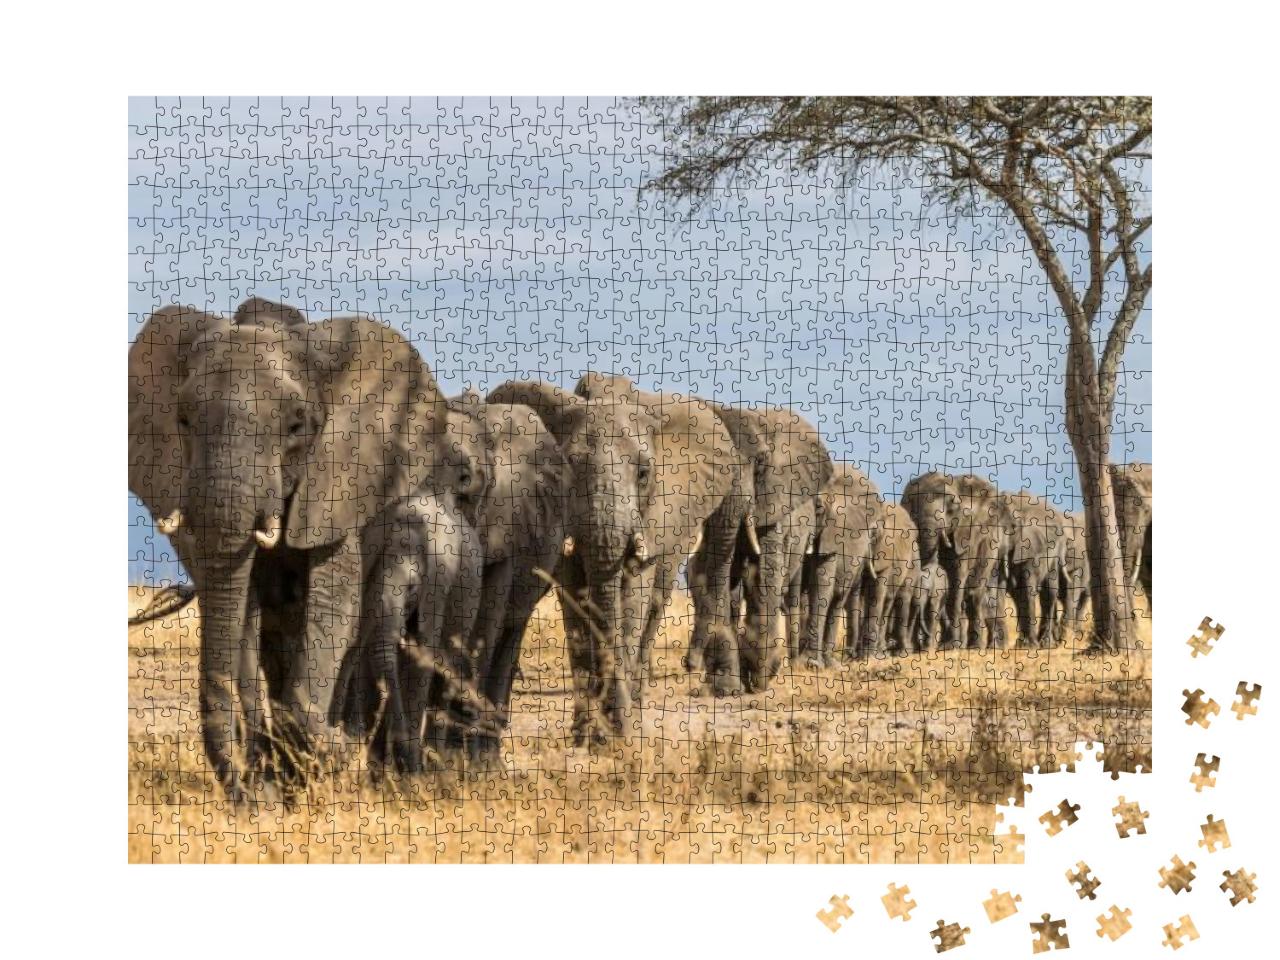 Herd of Elephants in Africa Walking Through the Grass in... Jigsaw Puzzle with 1000 pieces